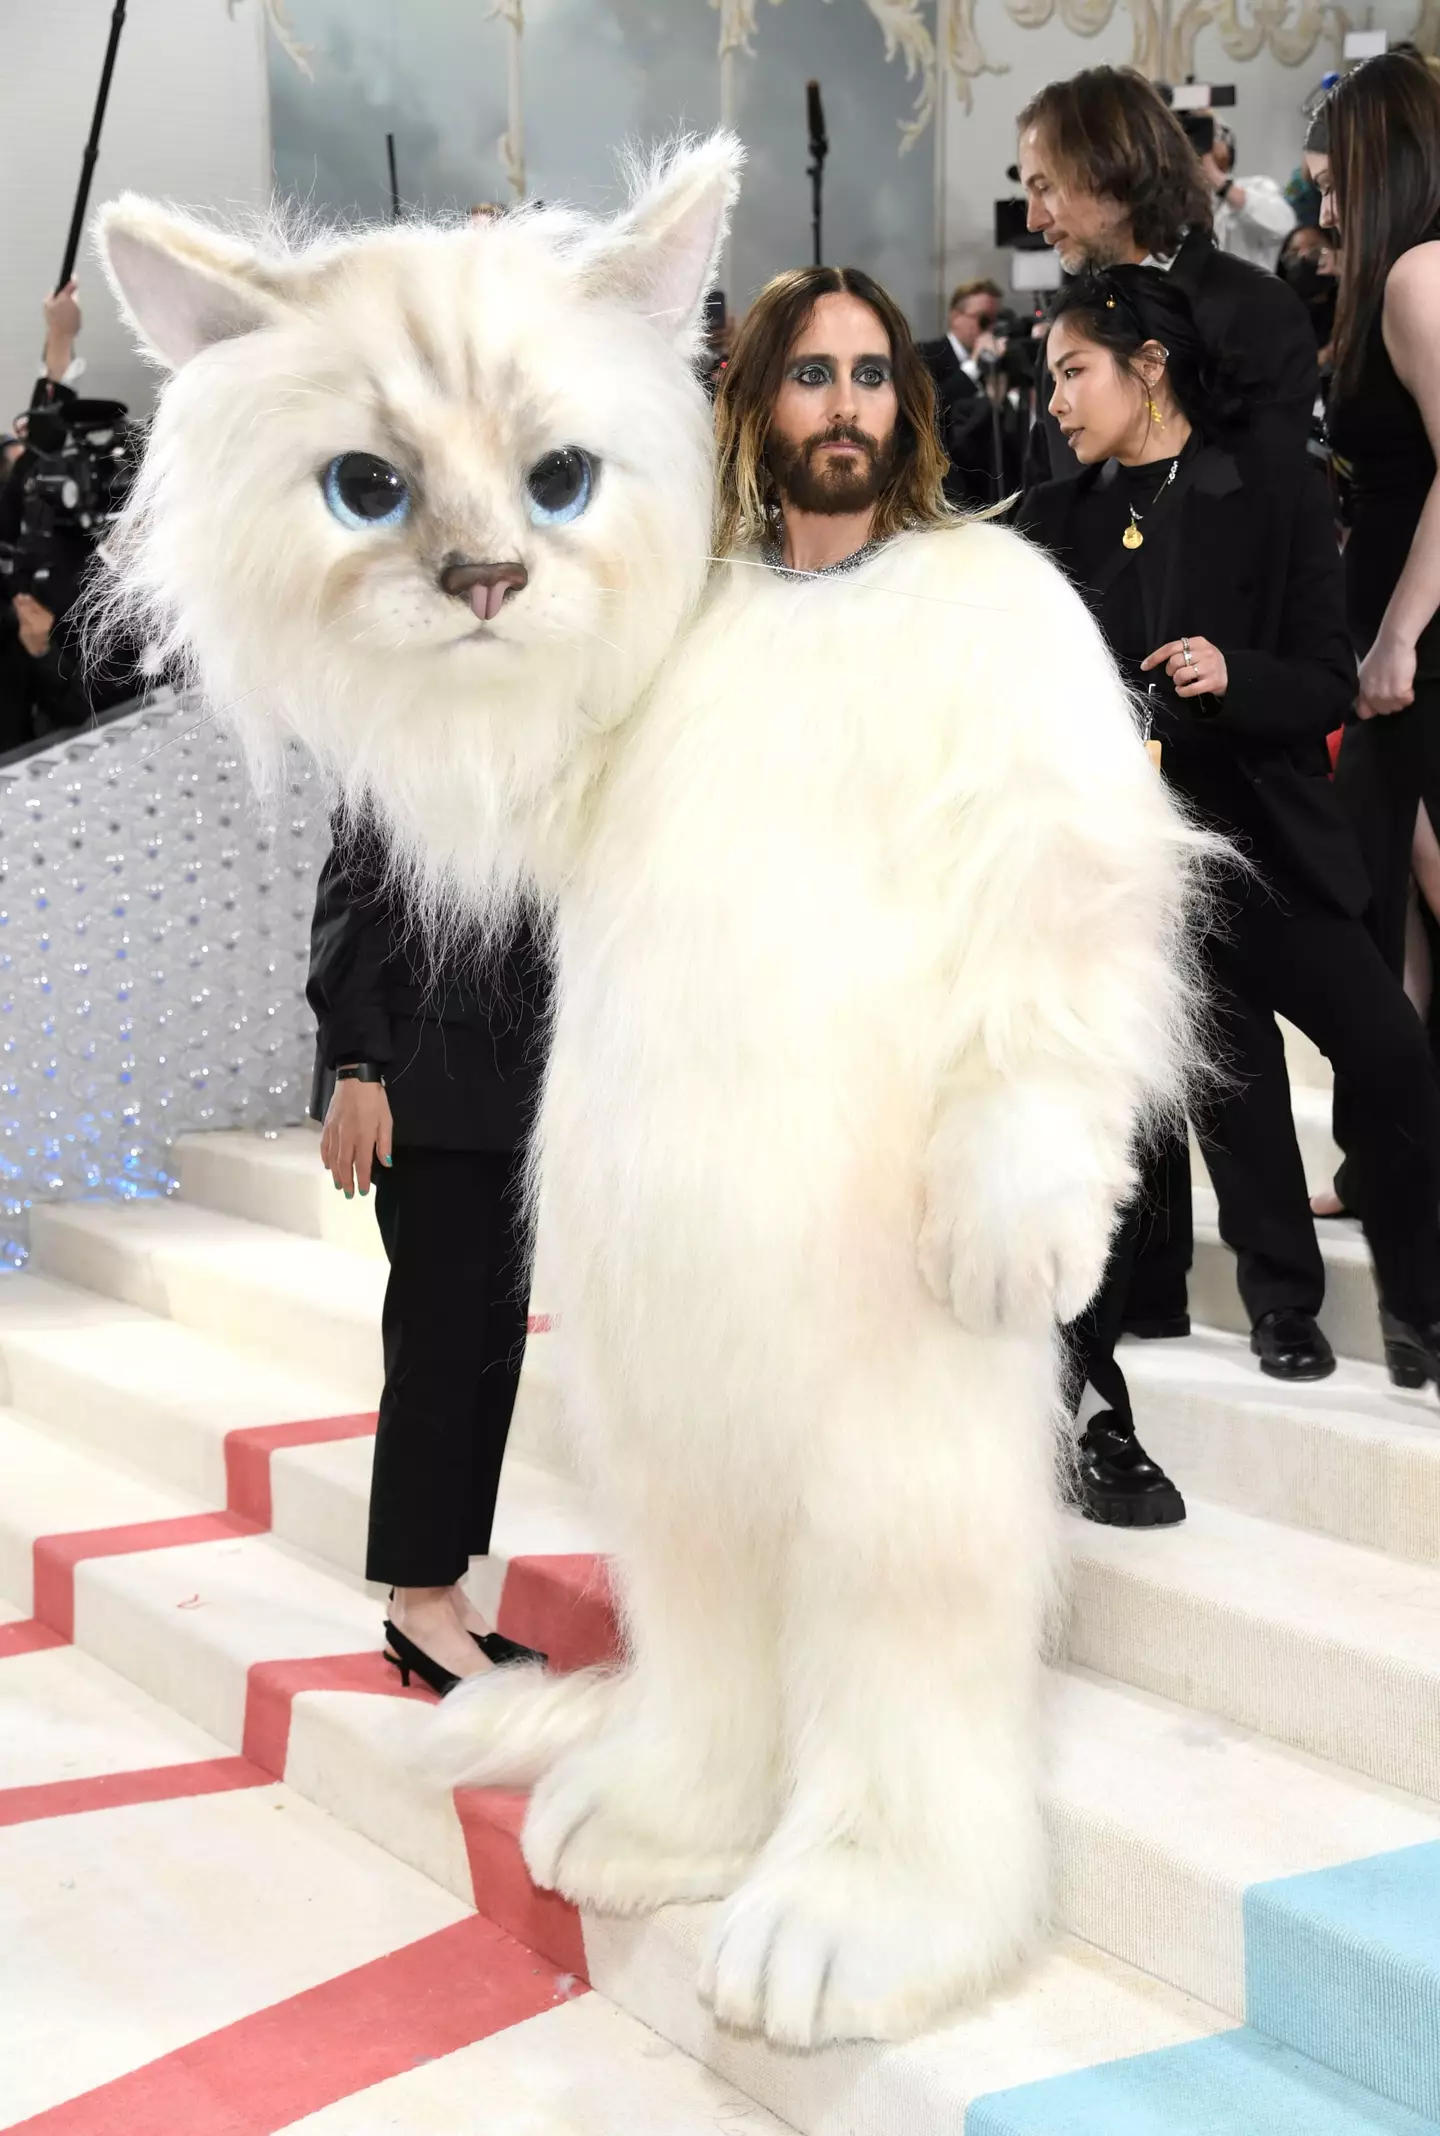 Jared Leto turned up in a full cat outfit.